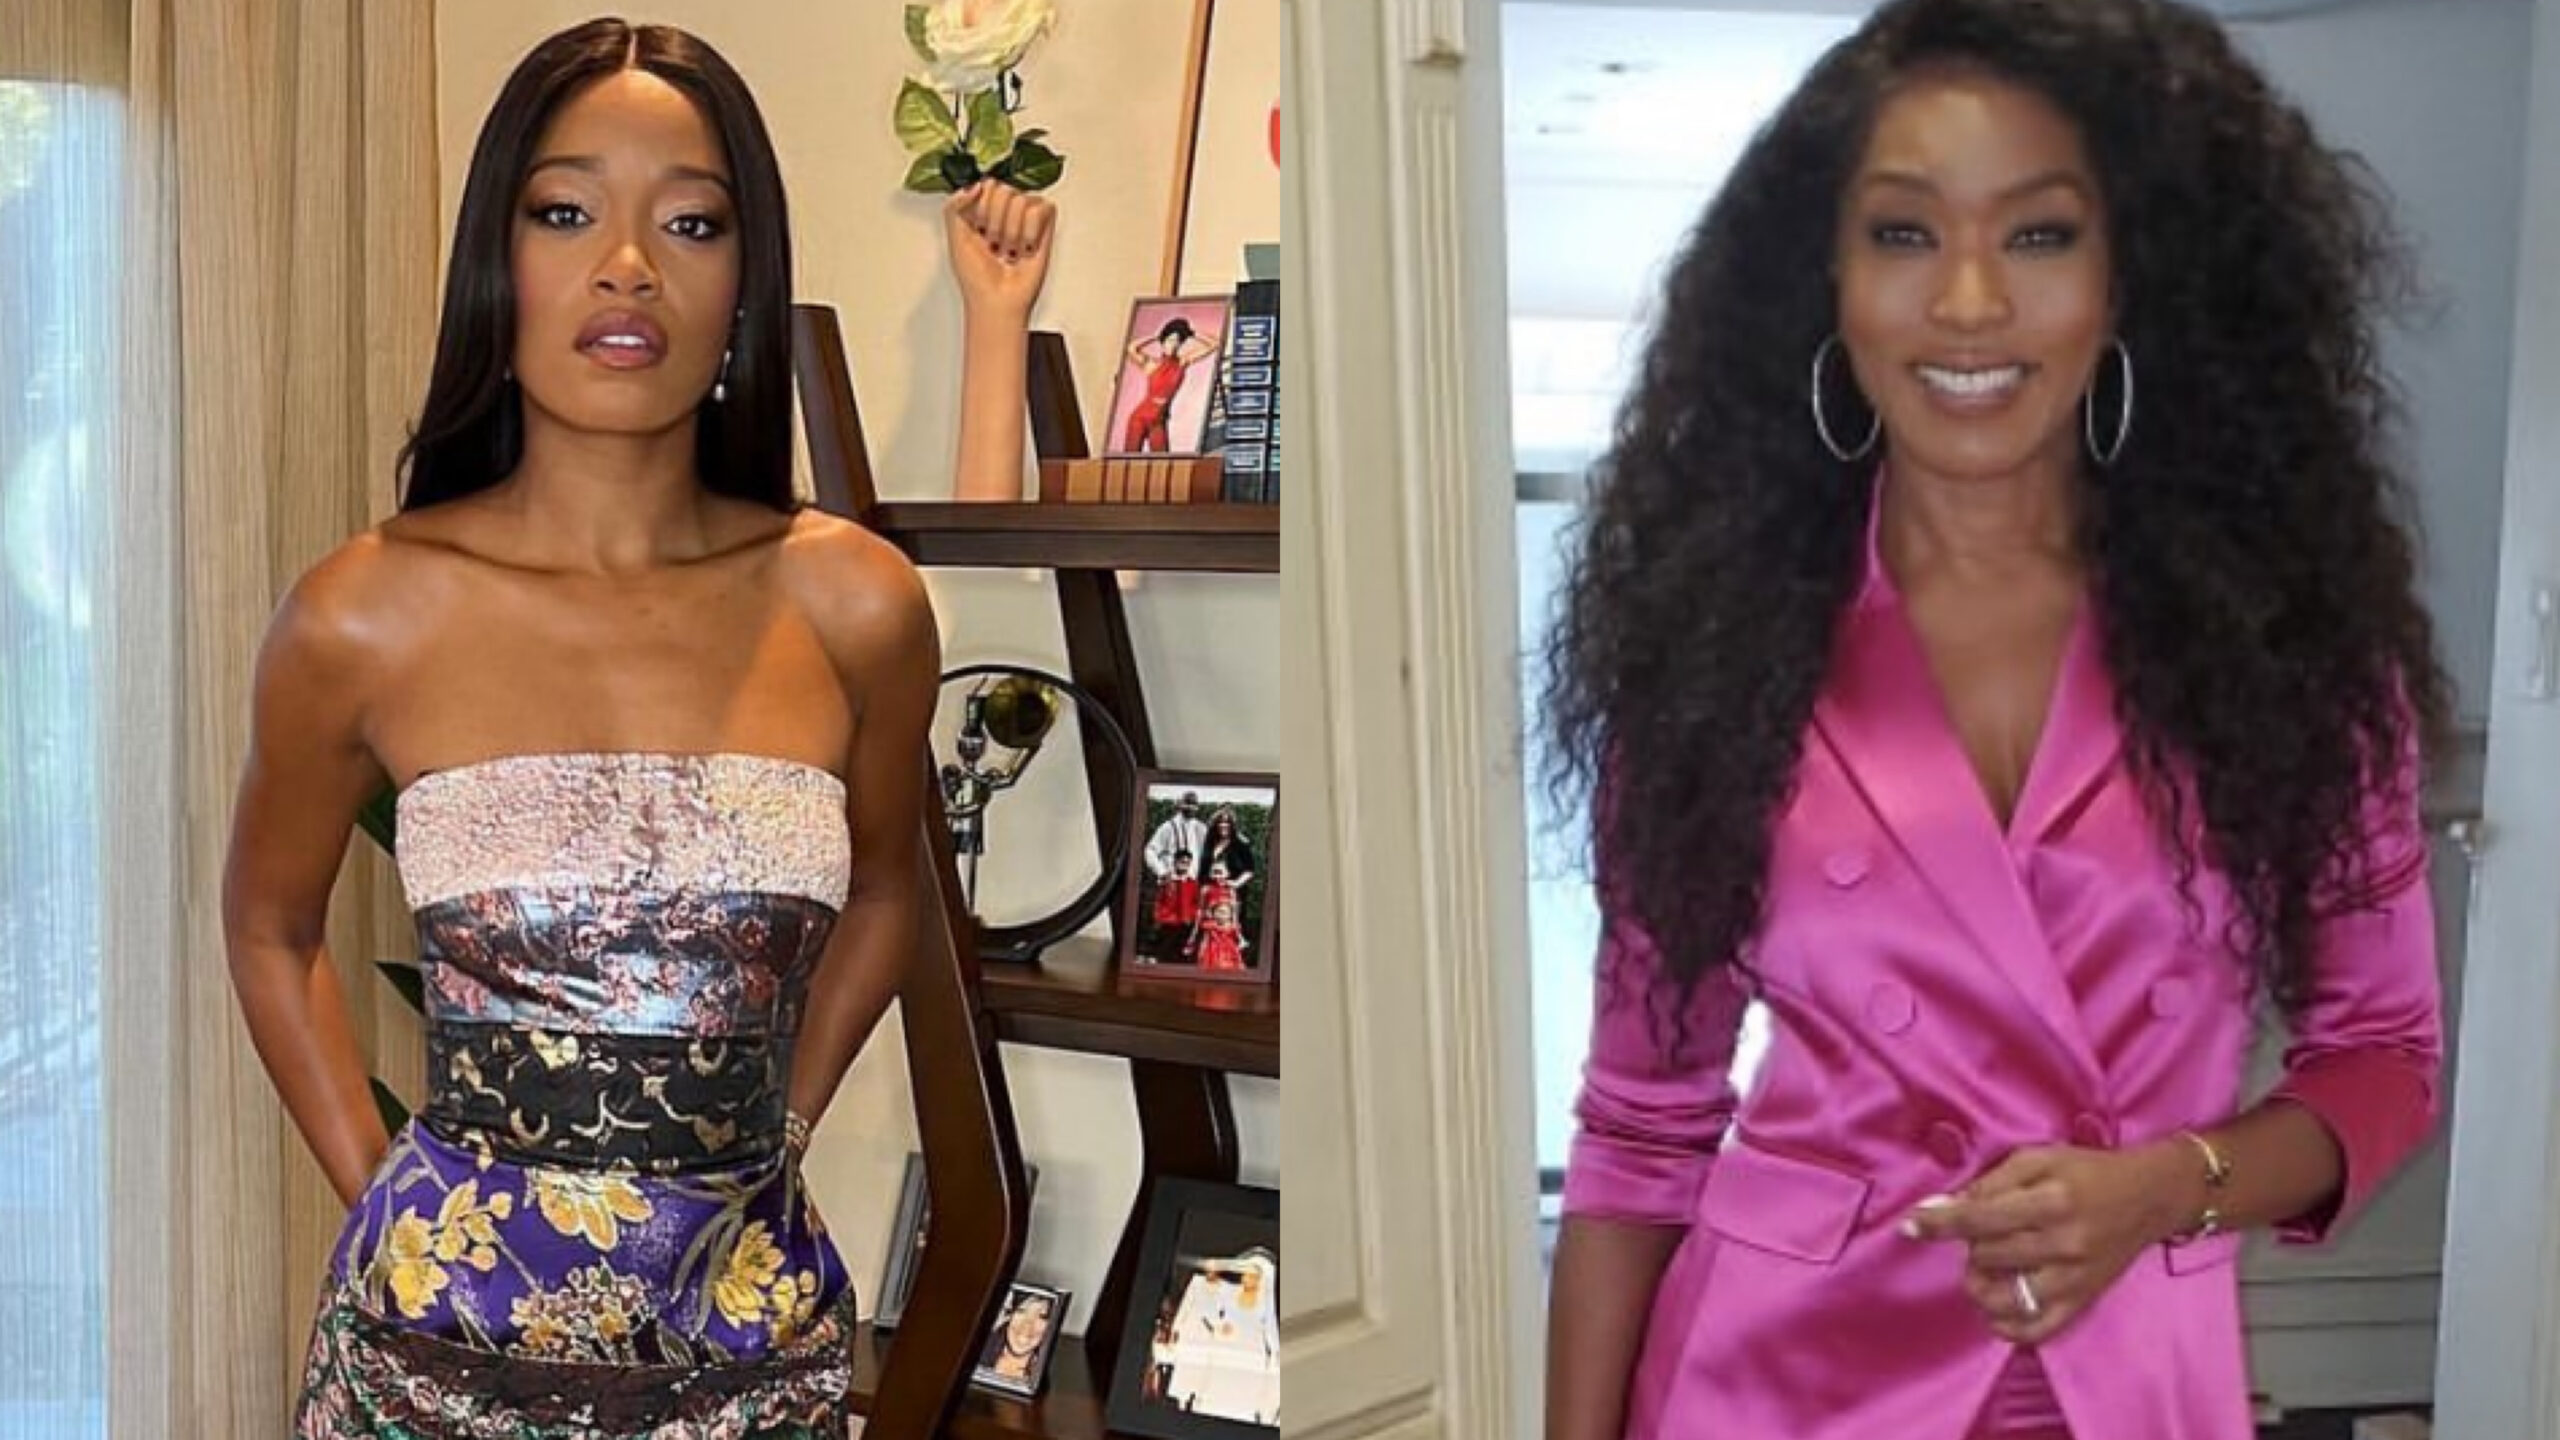 Keke Palmer Causes a Frenzy on Social Media After Showing Off Her Best Impressions of Angela Bassett